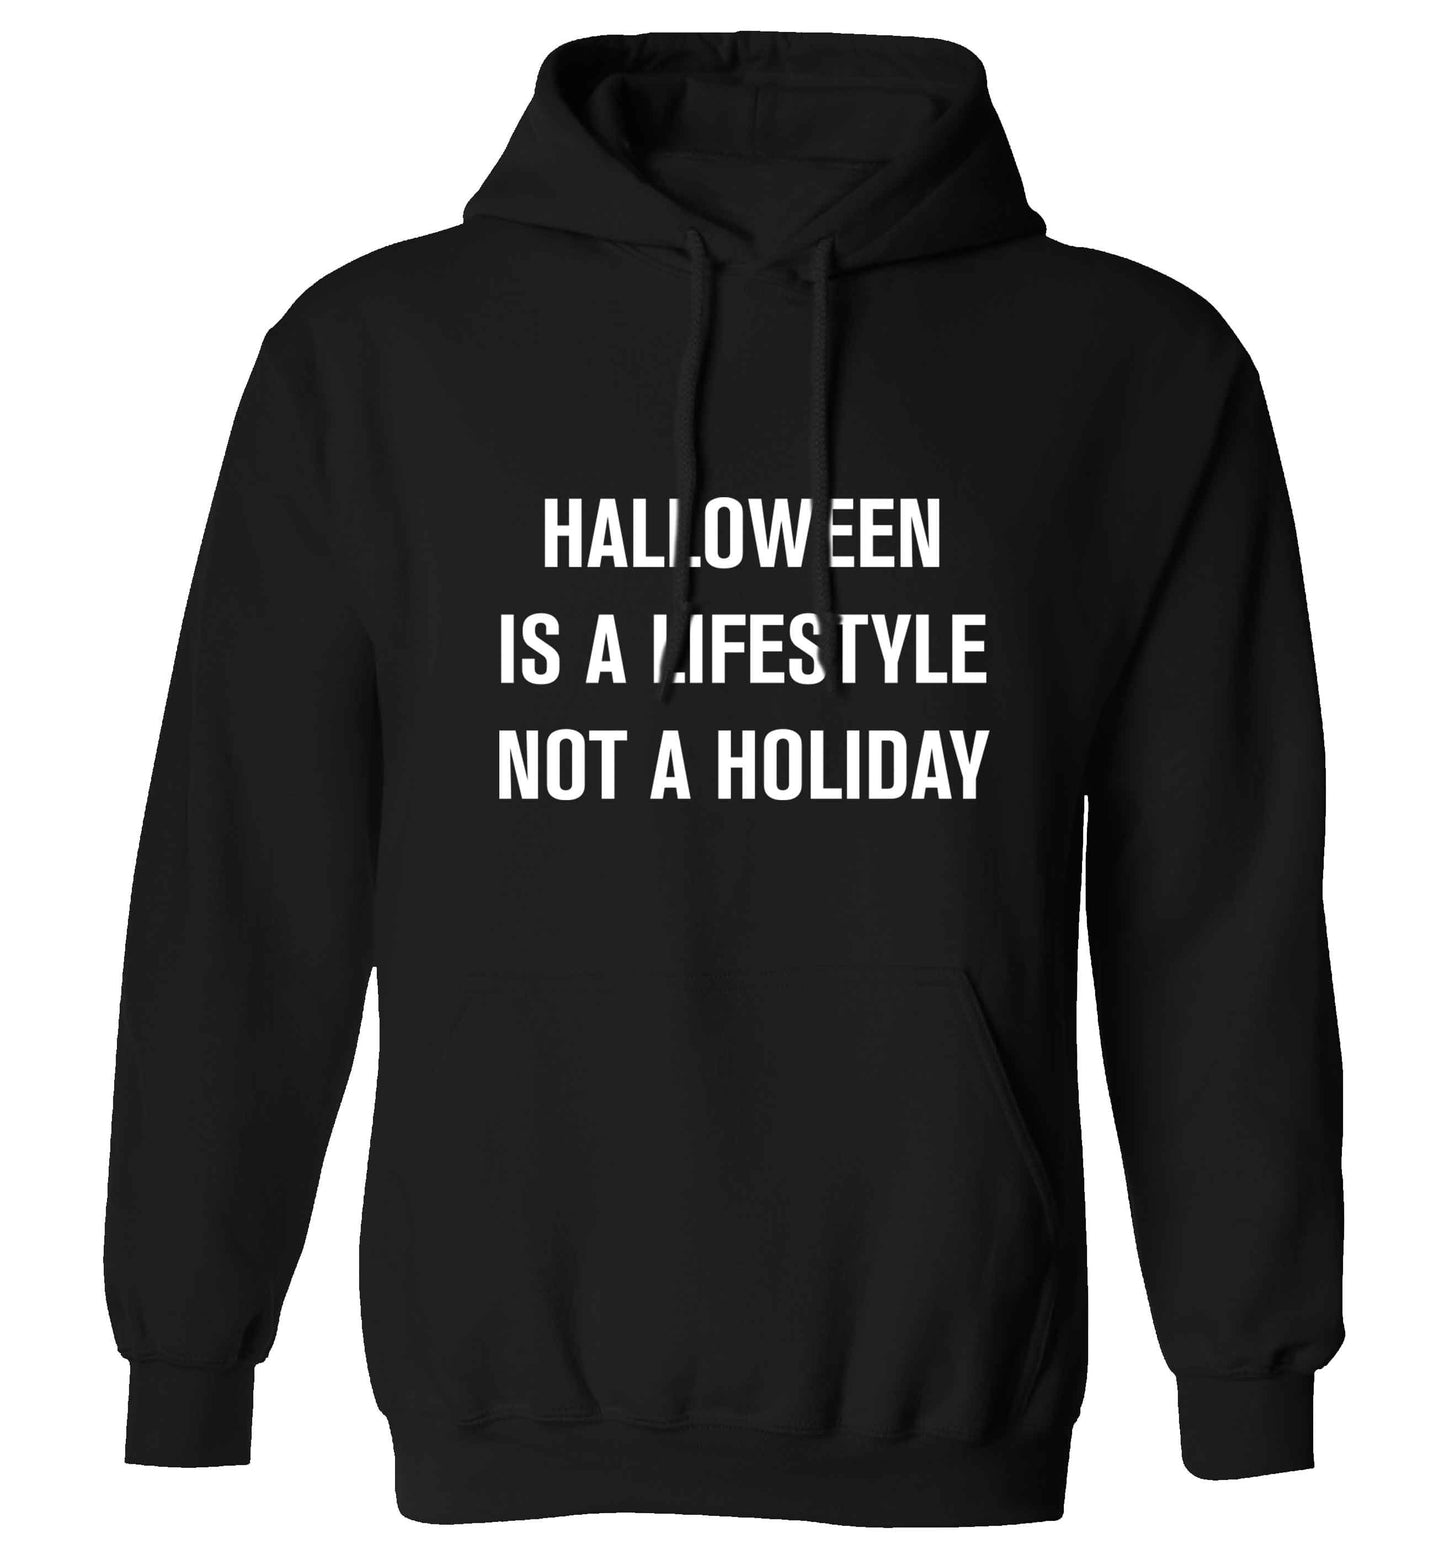 Halloween is a lifestyle not a holiday adults unisex black hoodie 2XL